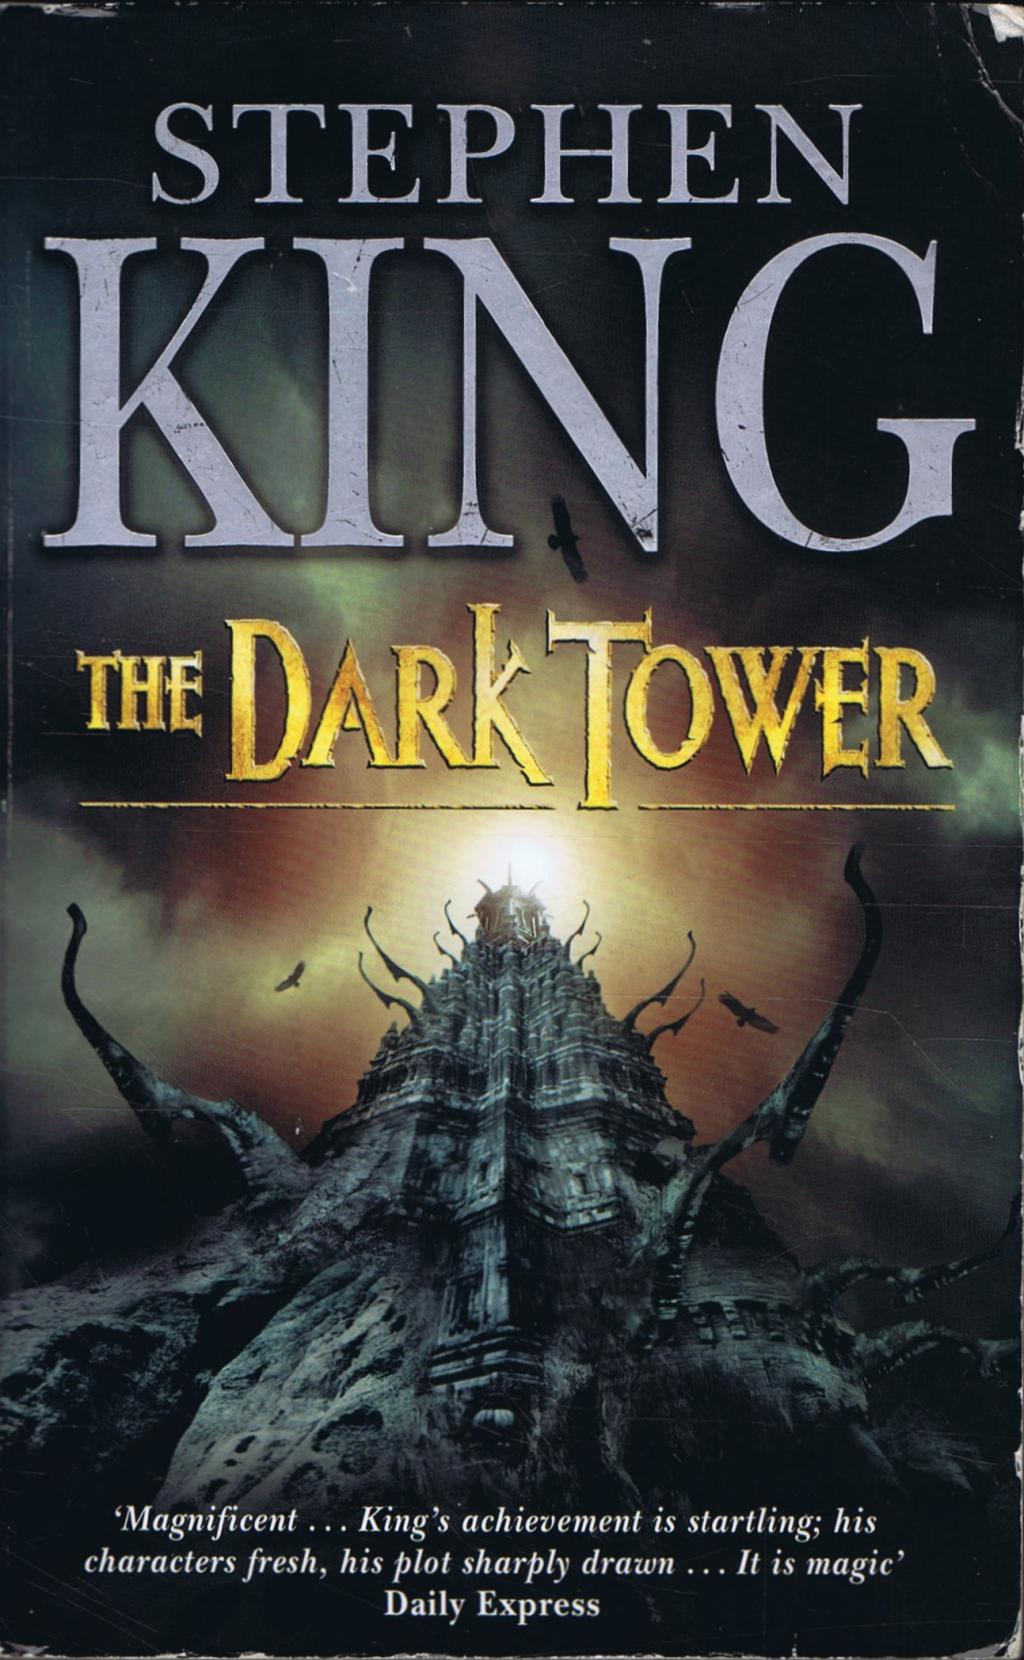 The Dark Tower instal the new for windows